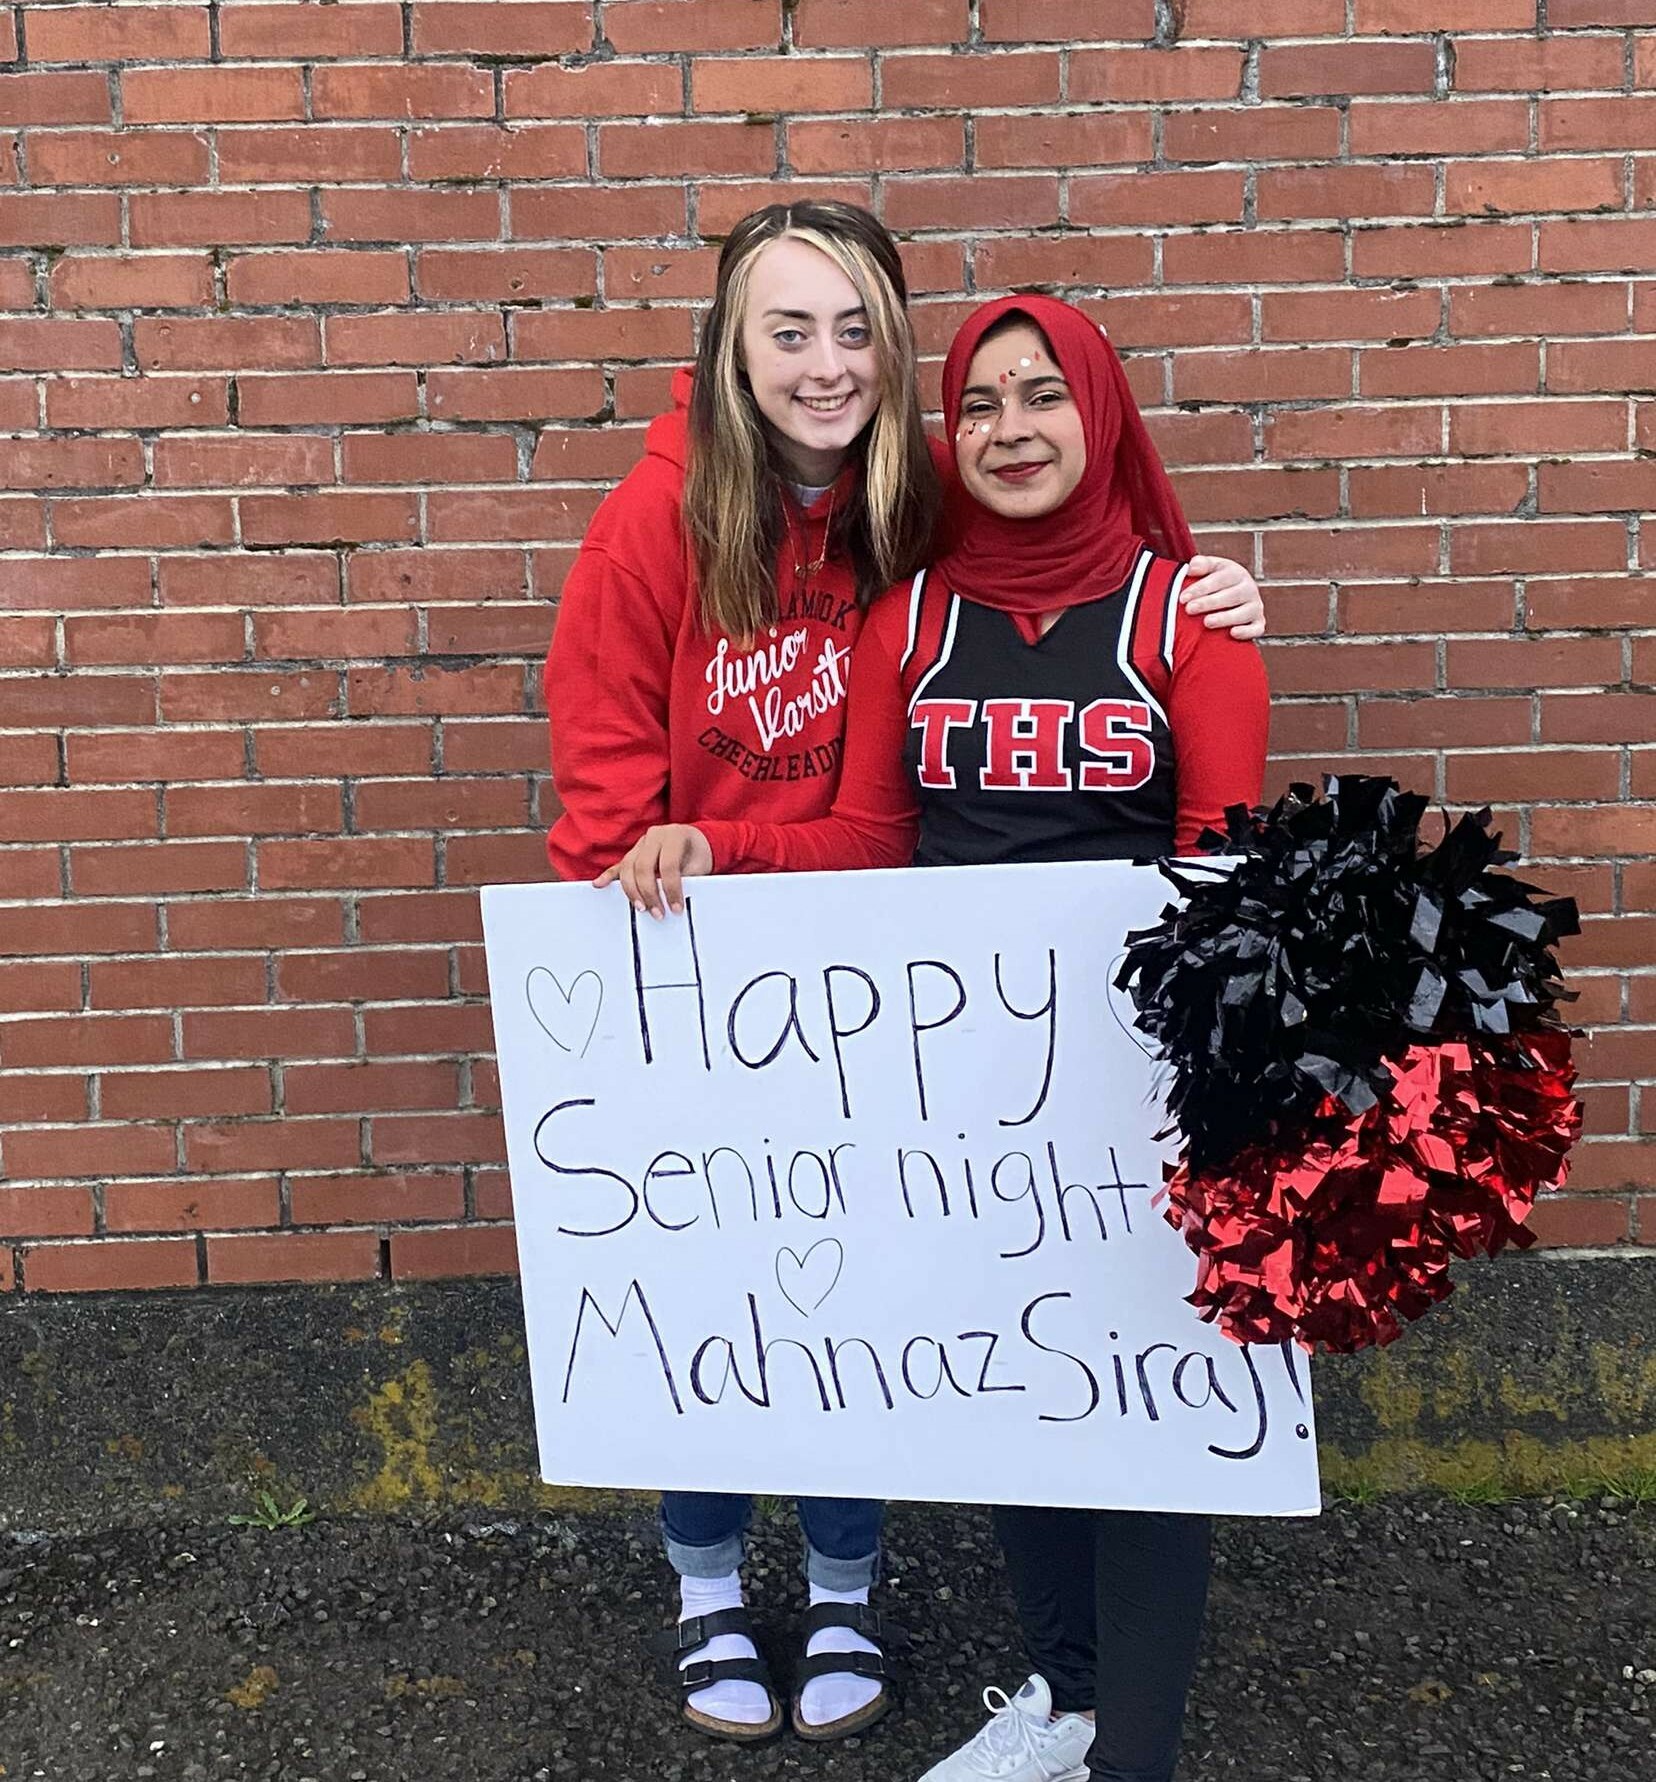 Mahnaz Posing With her cheer coach Outside Holding A Sign That Says  Happy Senior Night Manhaz Siraj